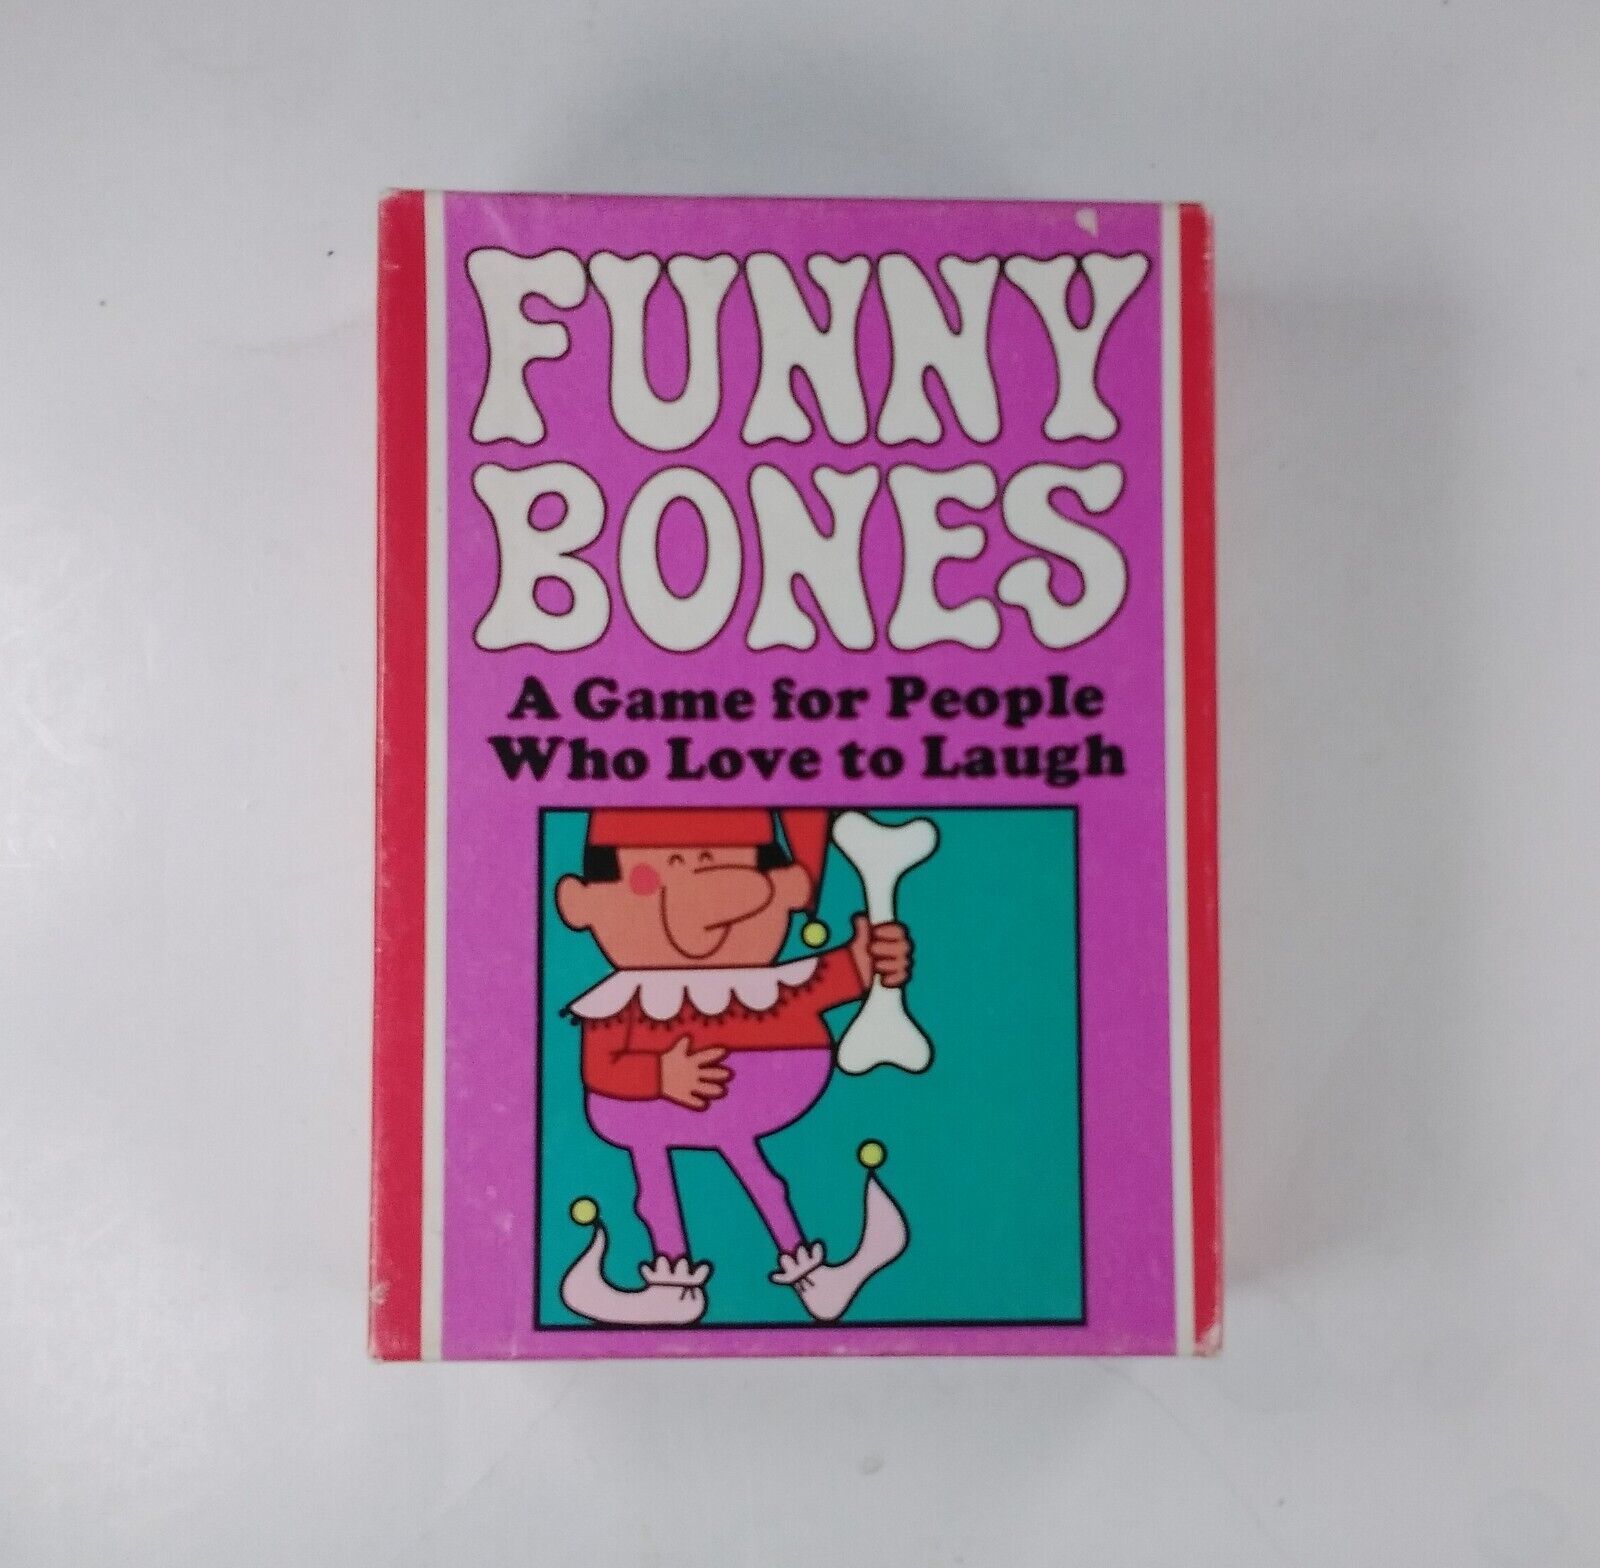 Parker Brothers Funny Bones: For People Who Love to Laugh 1968 Vintage Card Game - $5.95